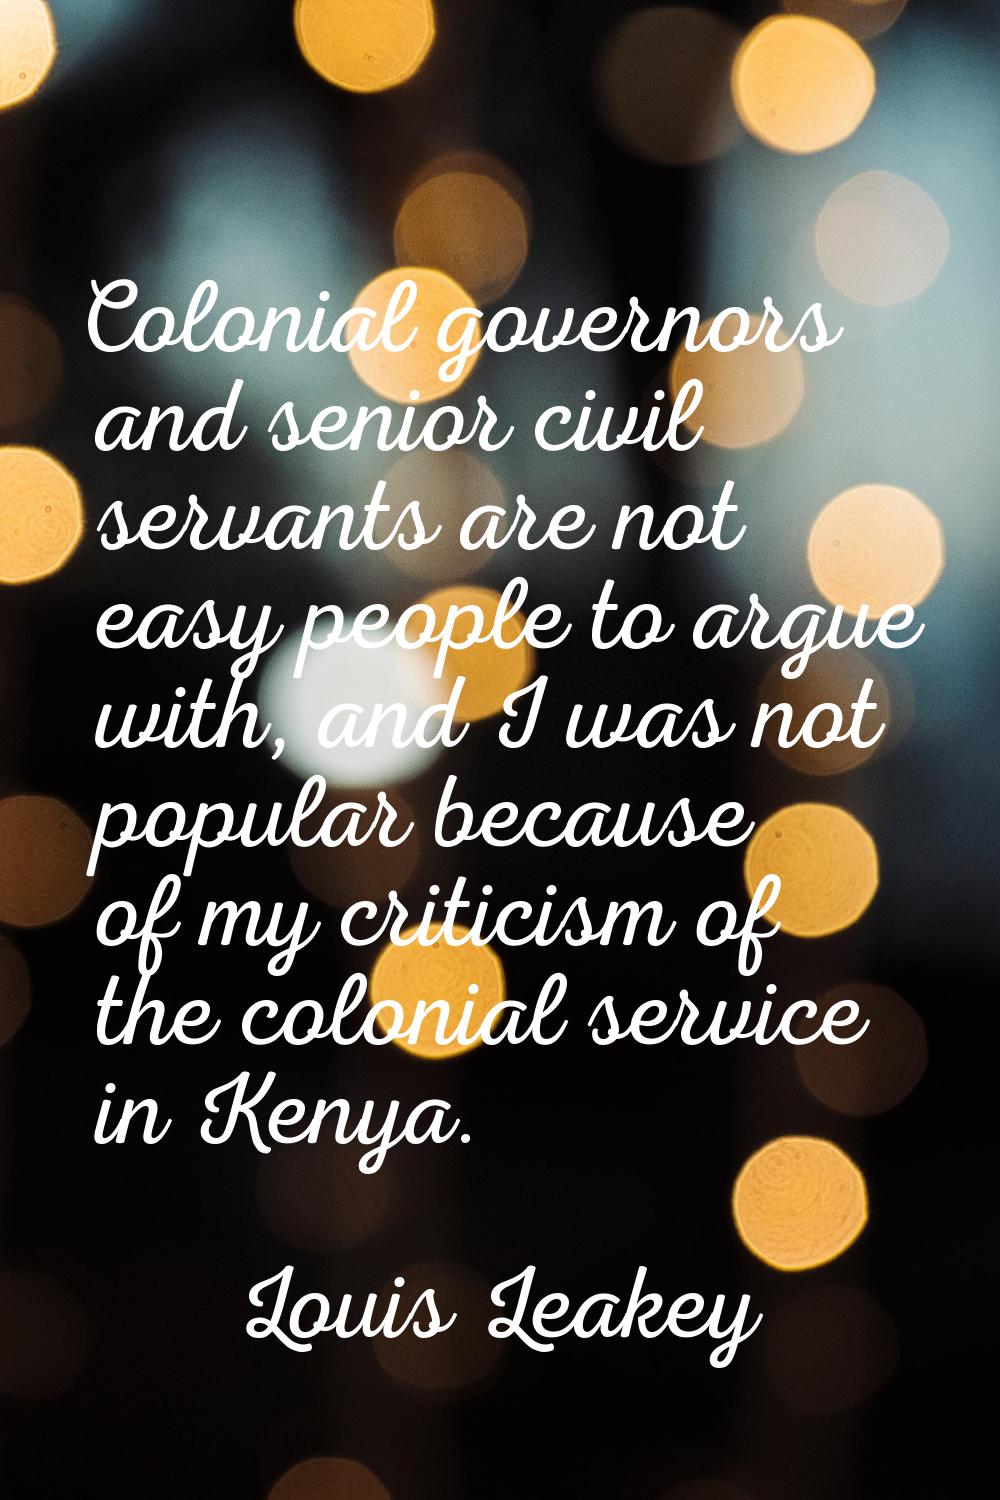 Colonial governors and senior civil servants are not easy people to argue with, and I was not popul